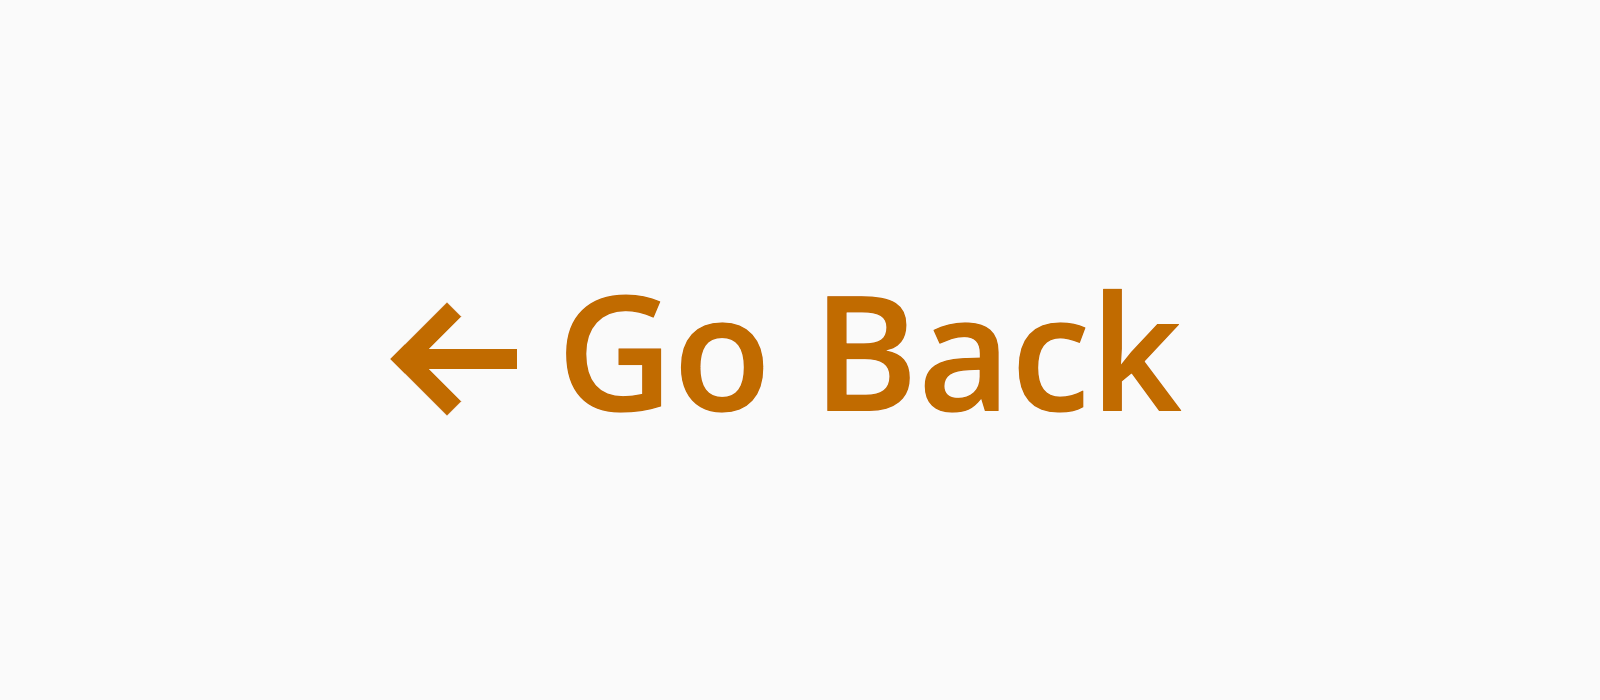 A go-back arrow drawn with CSS pseudo-elements.